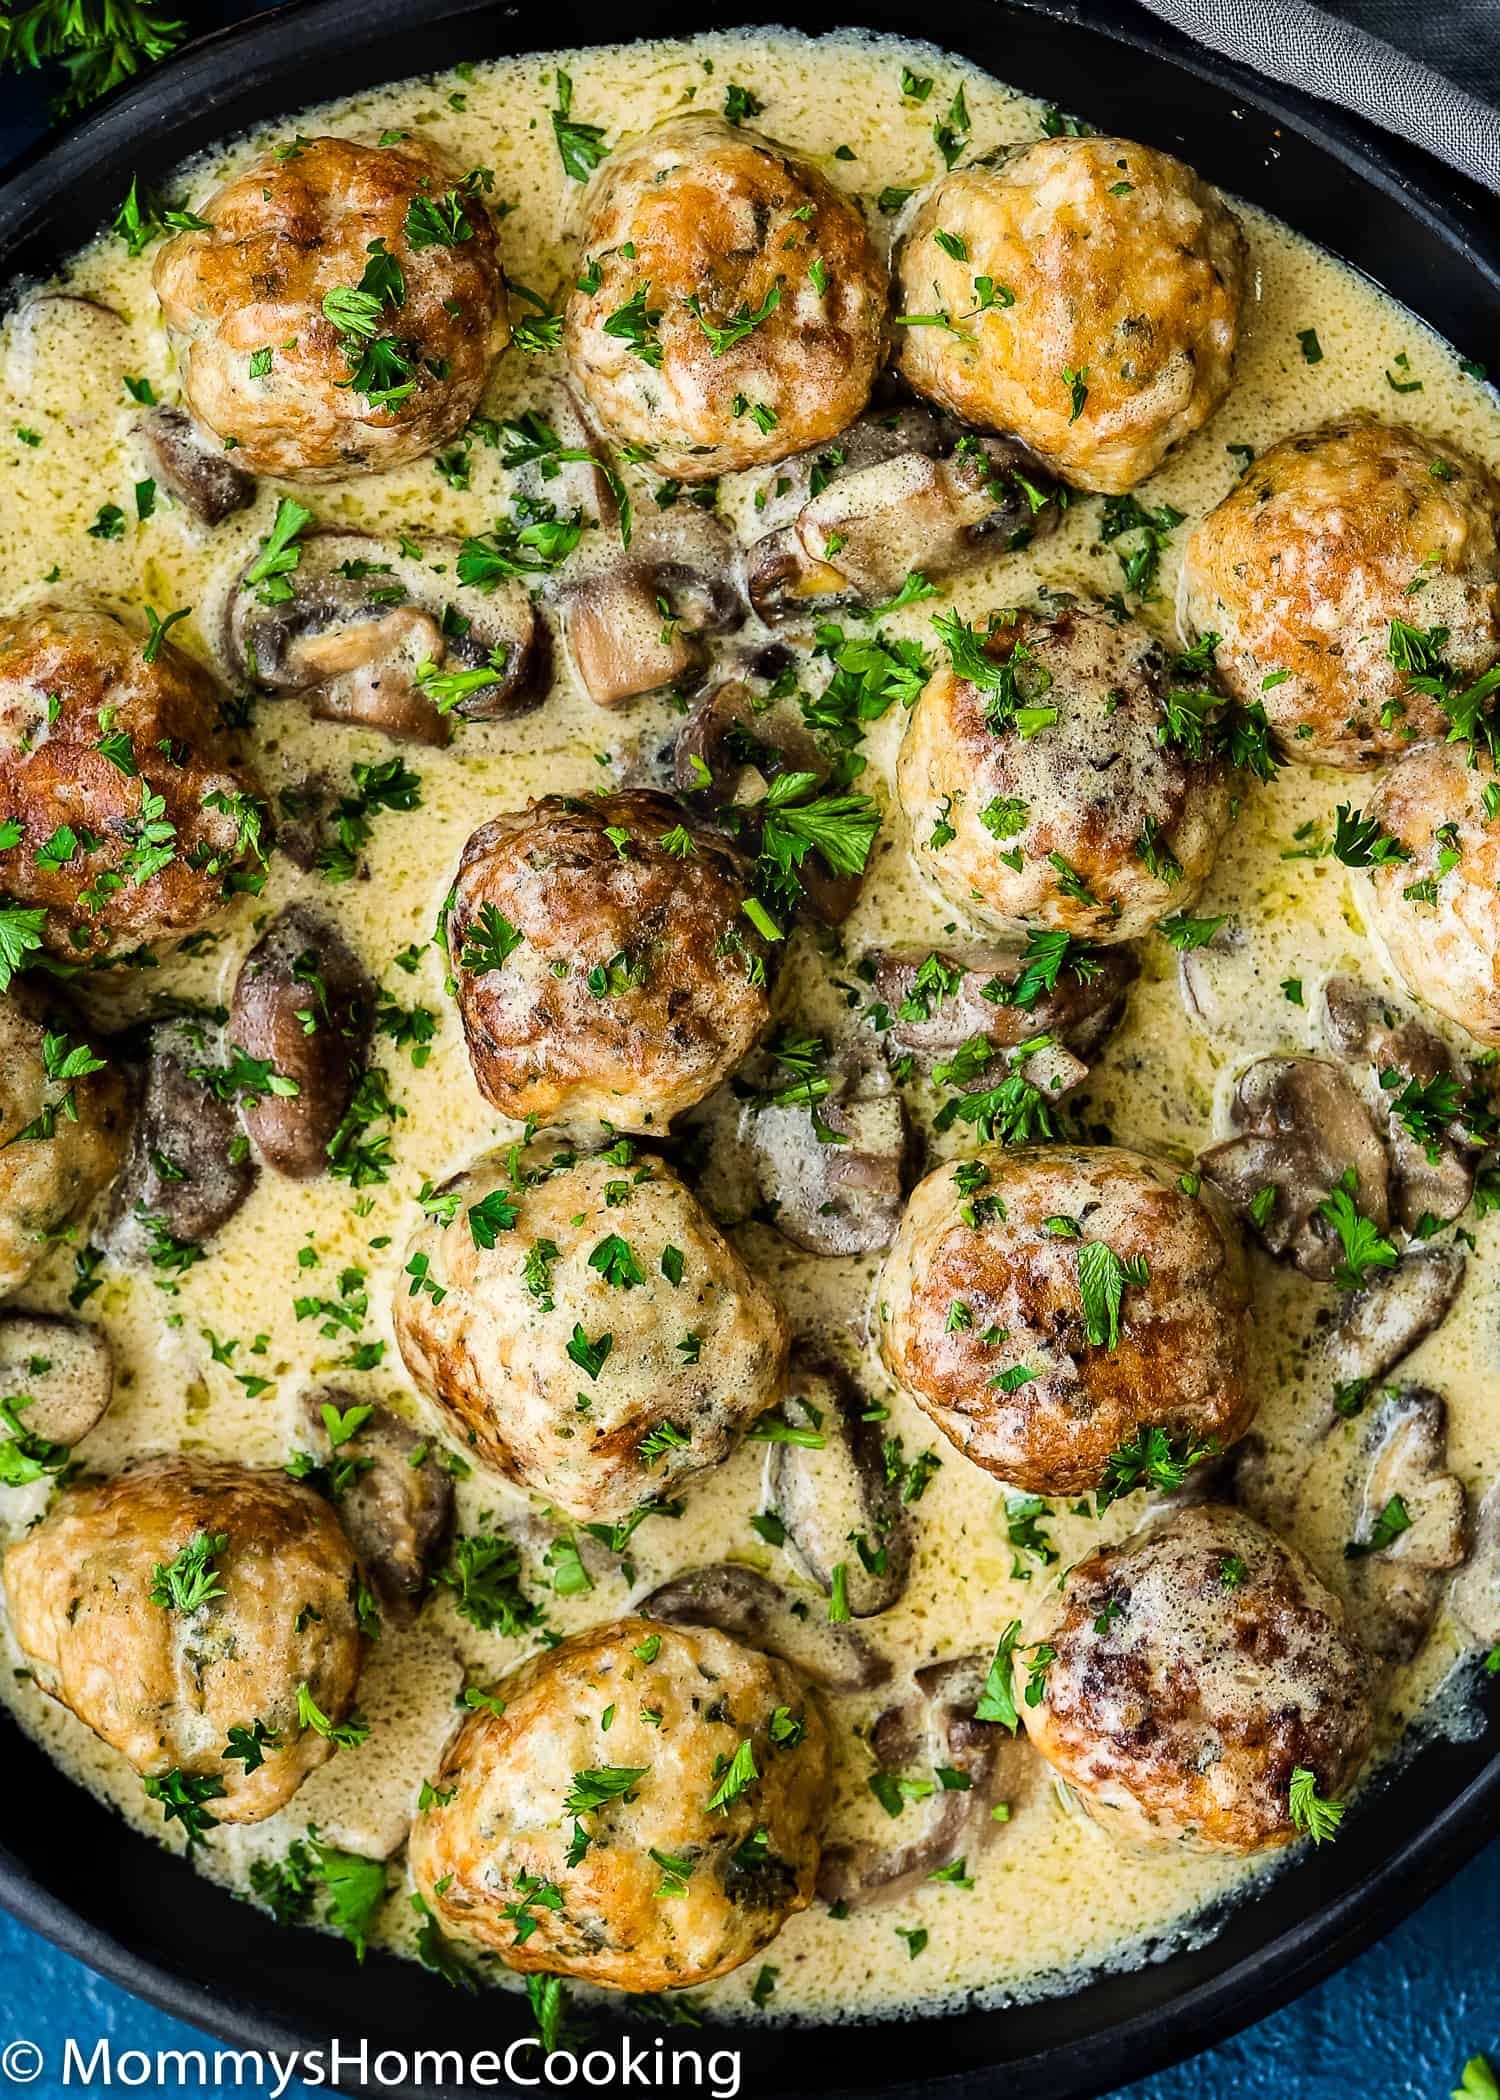 These Easy Instant Pot Stroganoff Meatballs are simply scrumptious! It takes only 30 minutes to make this family favorite dish. Made from scratch, NO canned stuff. https://mommyshomecooking.com